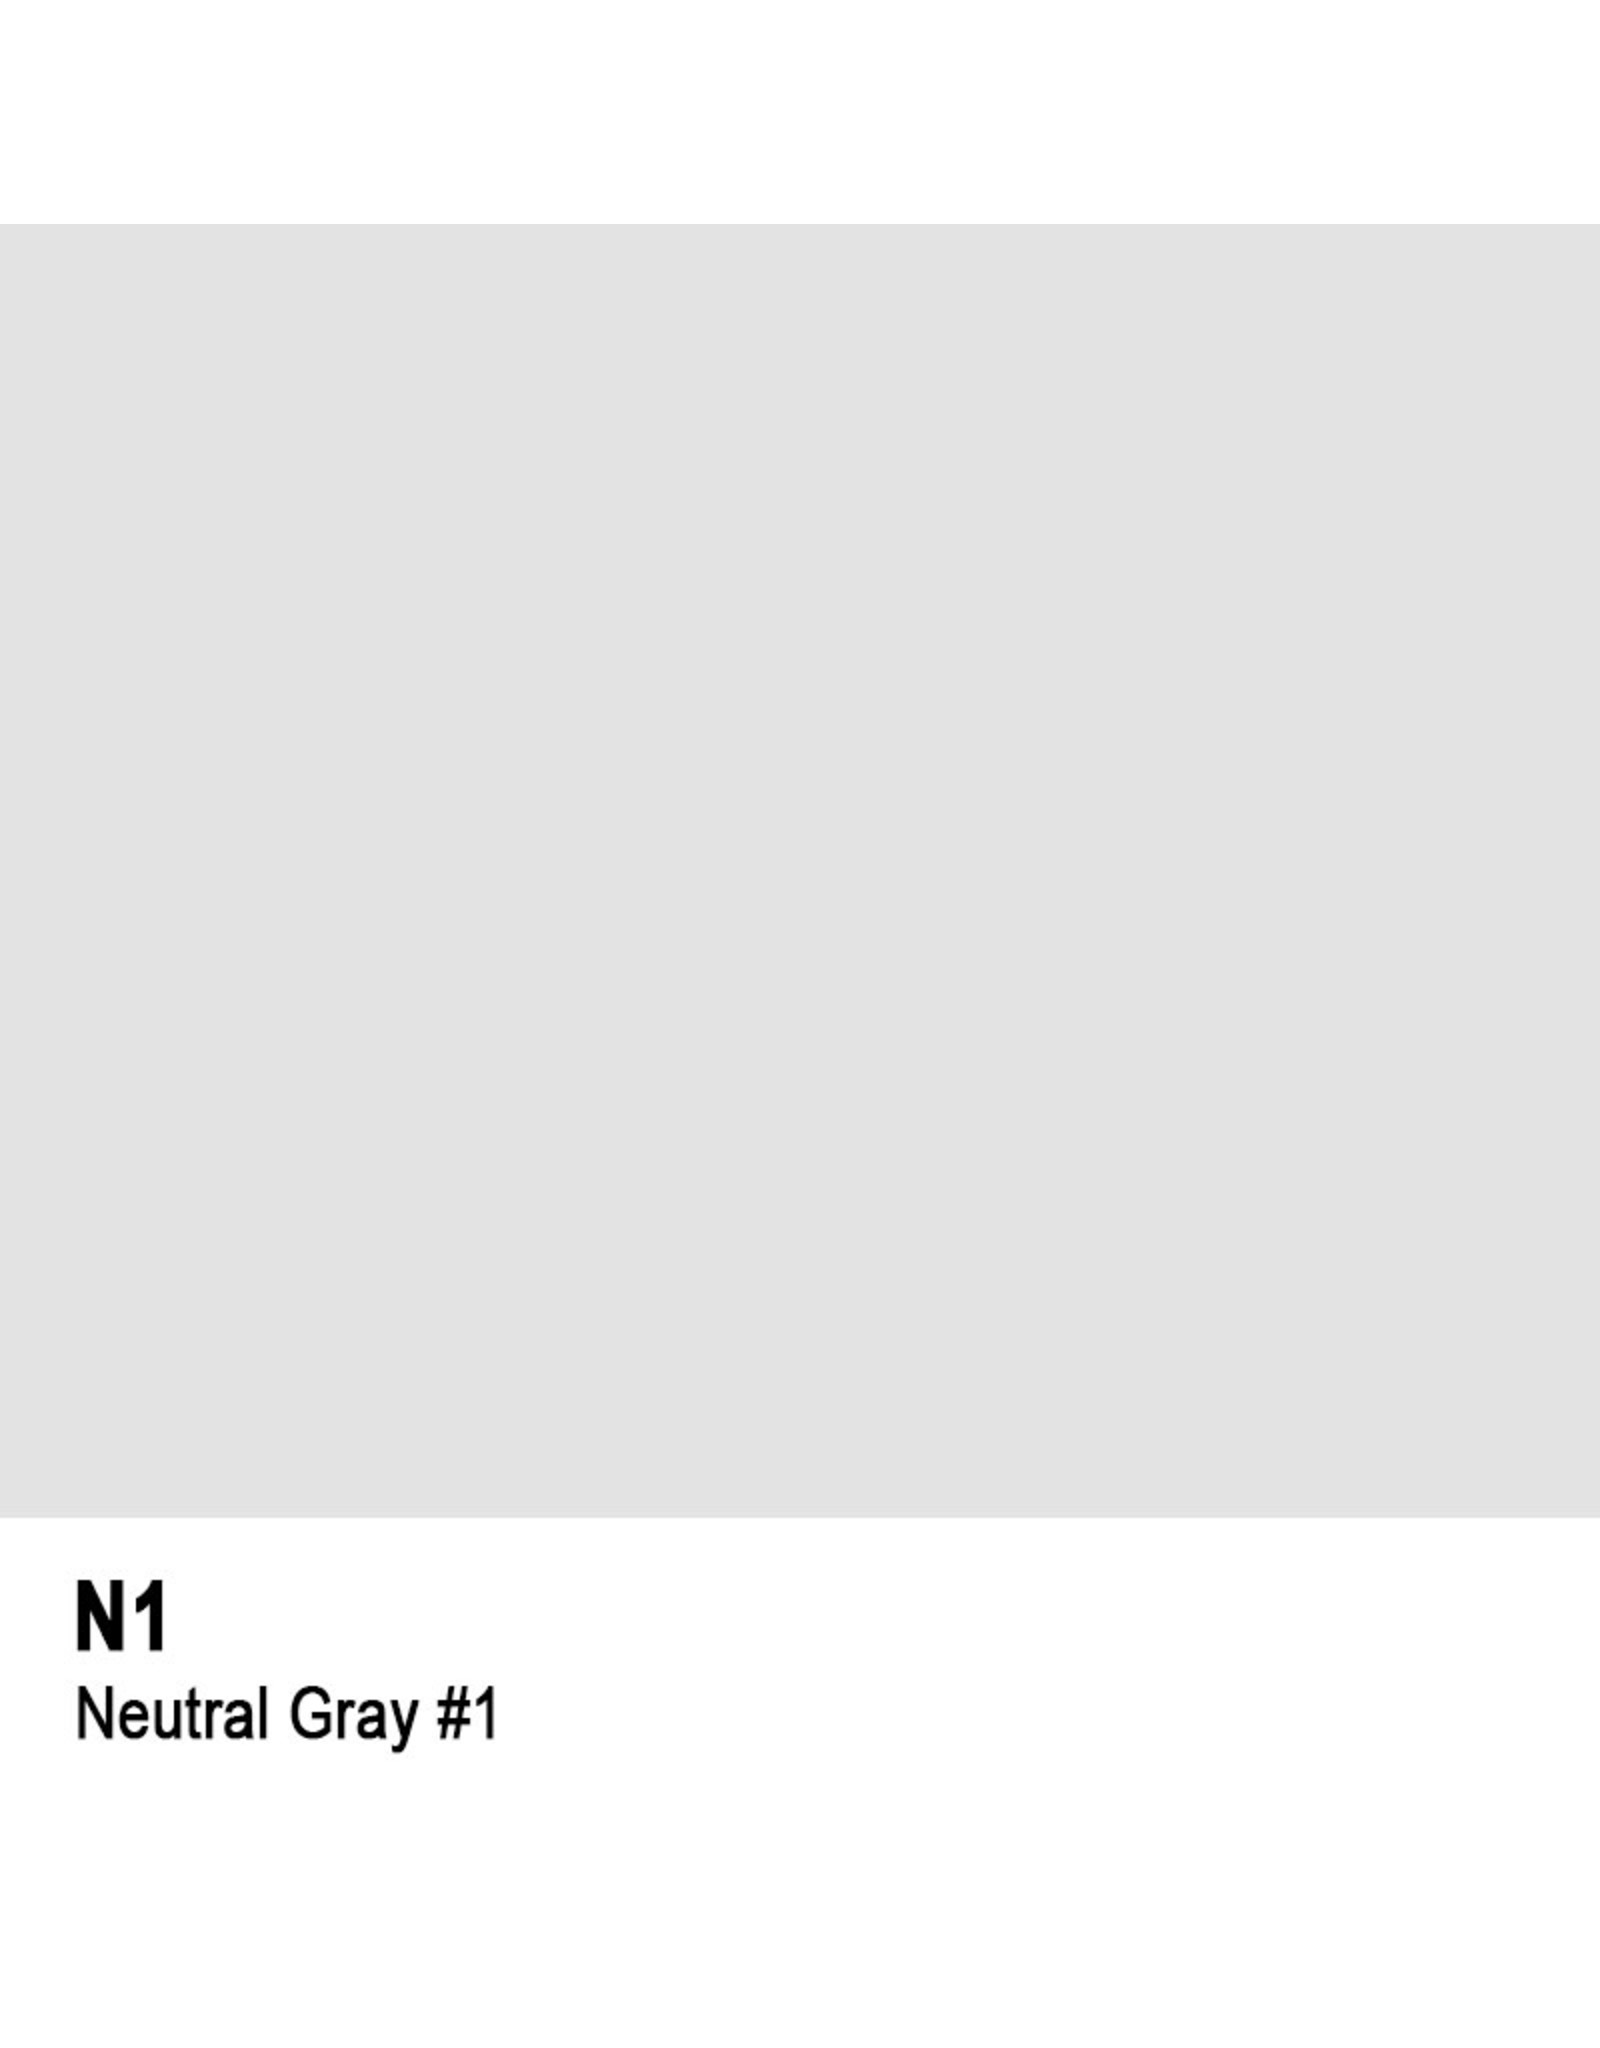 COPIC COPIC N1 NEUTRAL GRAY #1 SKETCH MARKER